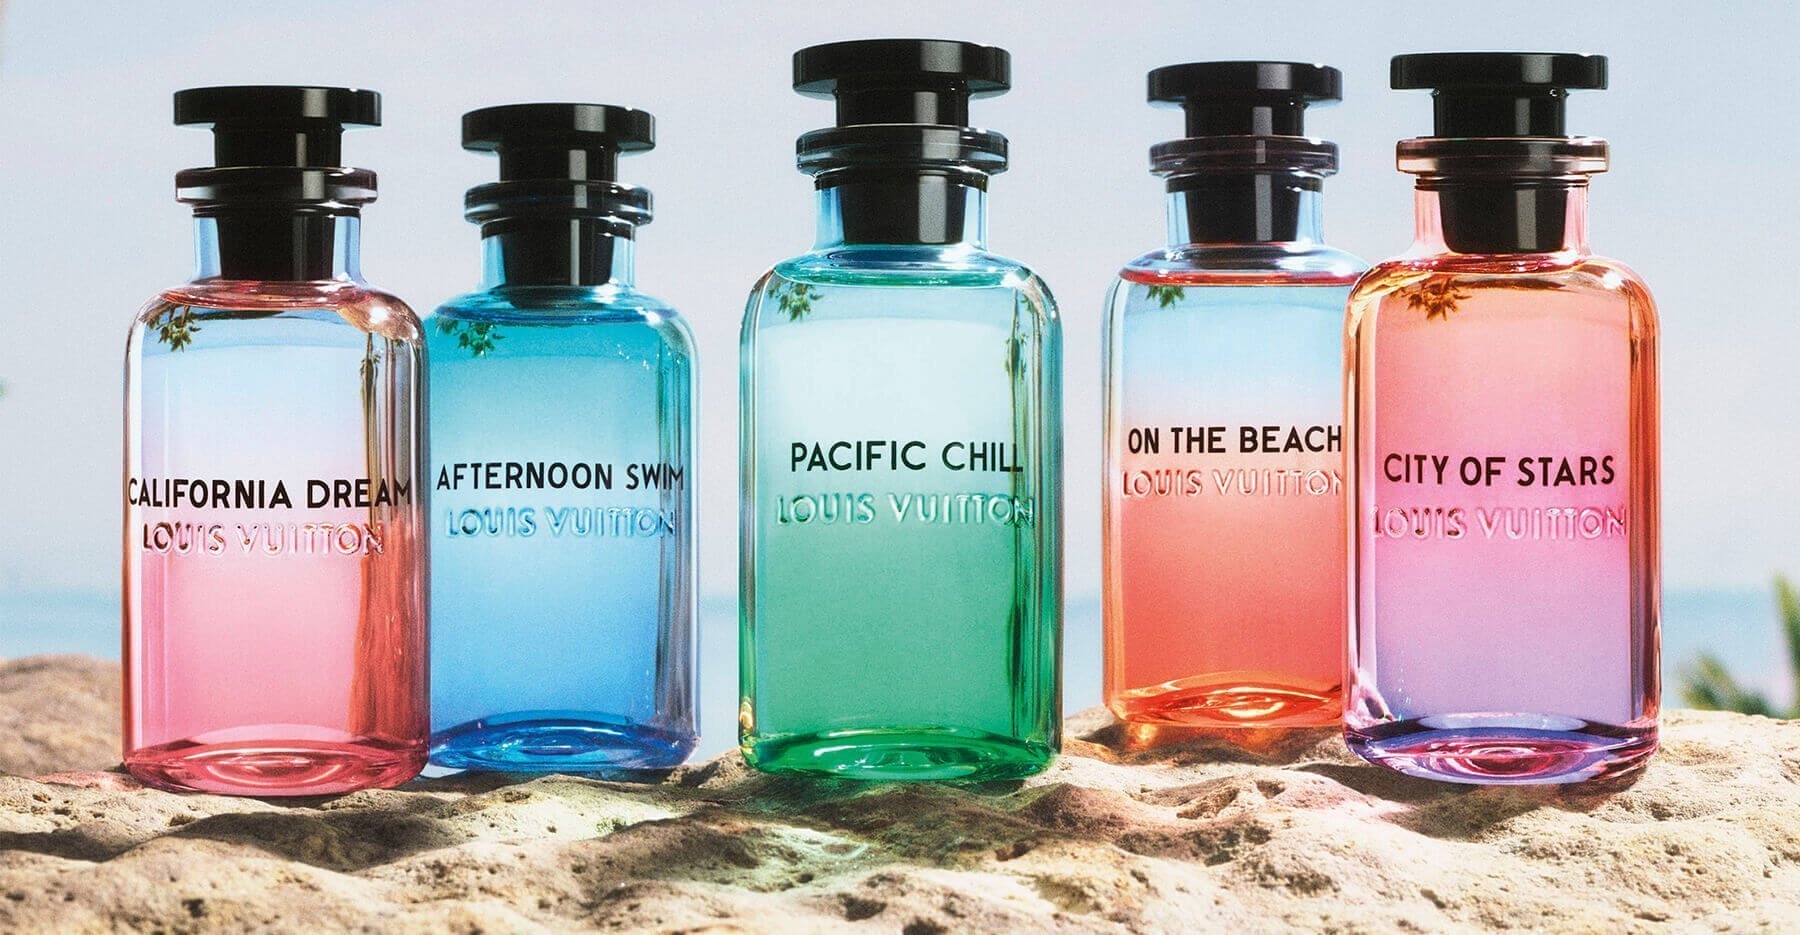 Louis Vuitton's New Pacific Chill Cologne Perfume Is A Detoxifying